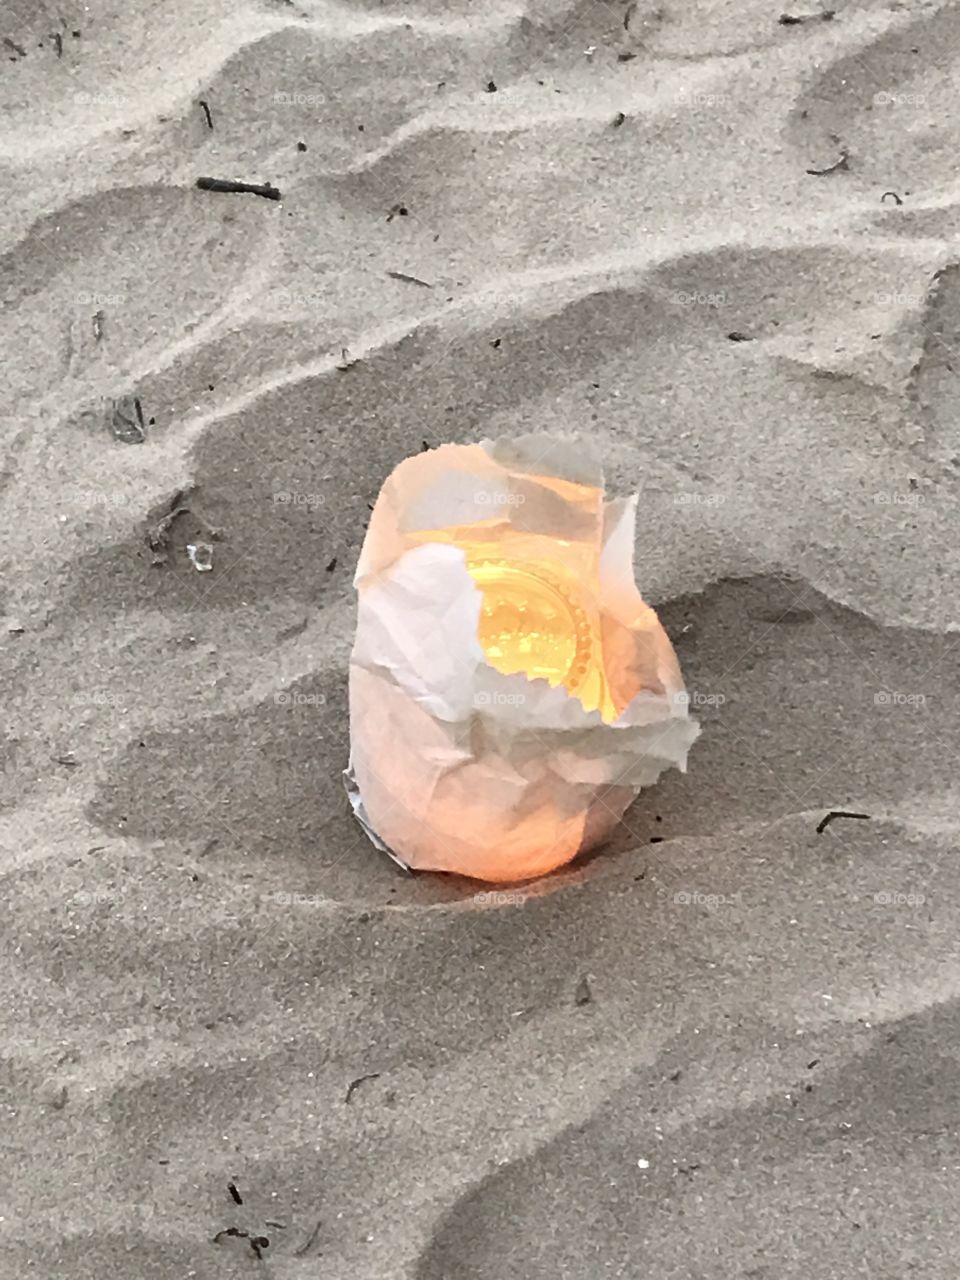 Light in the sand